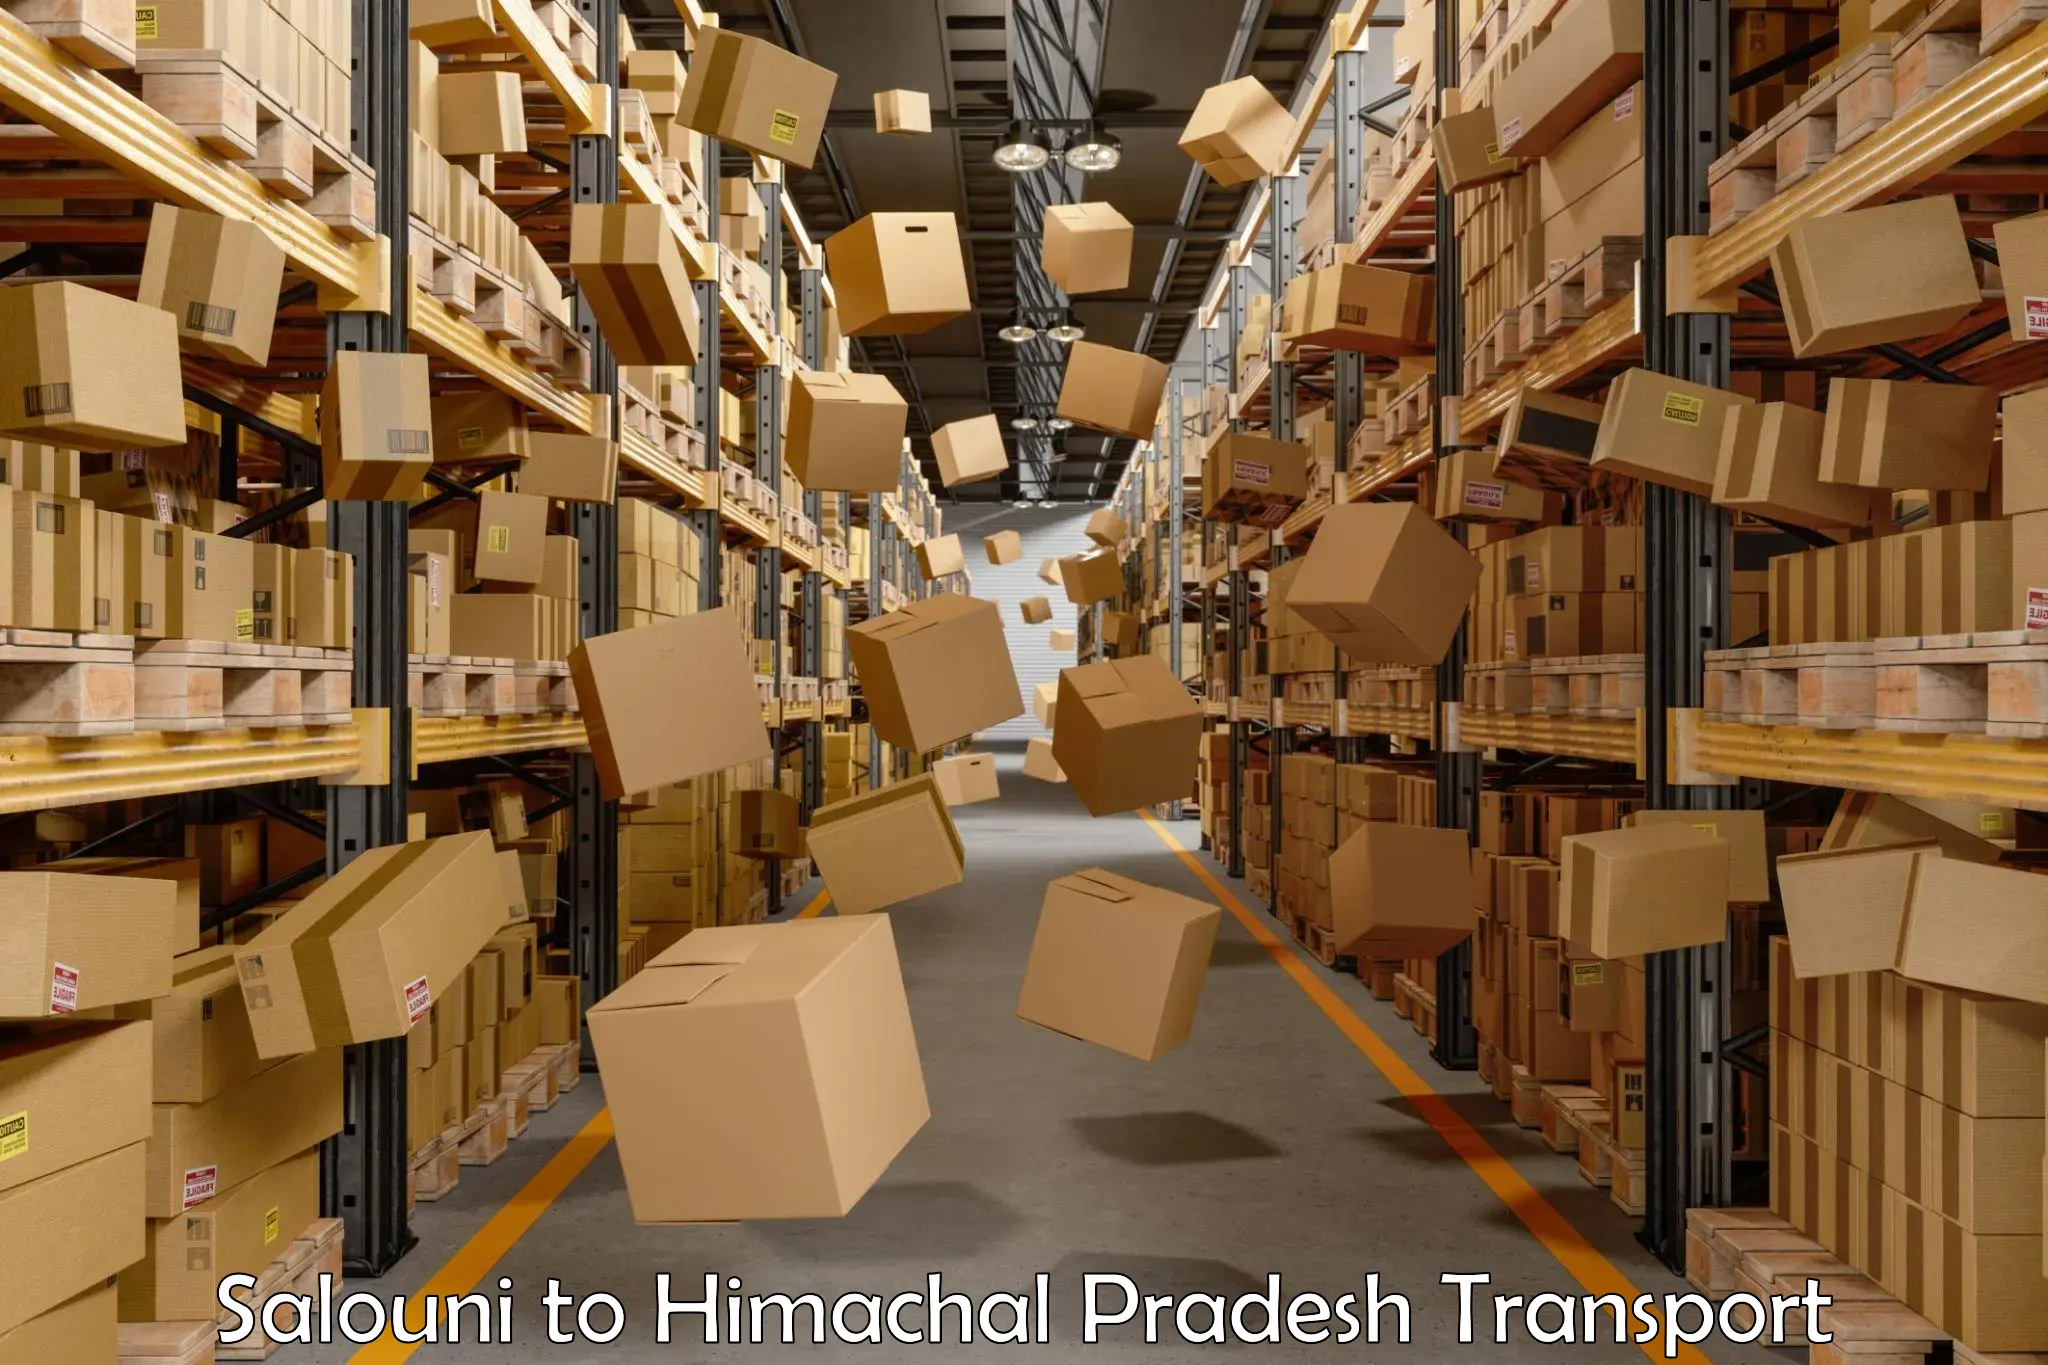 Transport shared services in Salouni to Himachal Pradesh